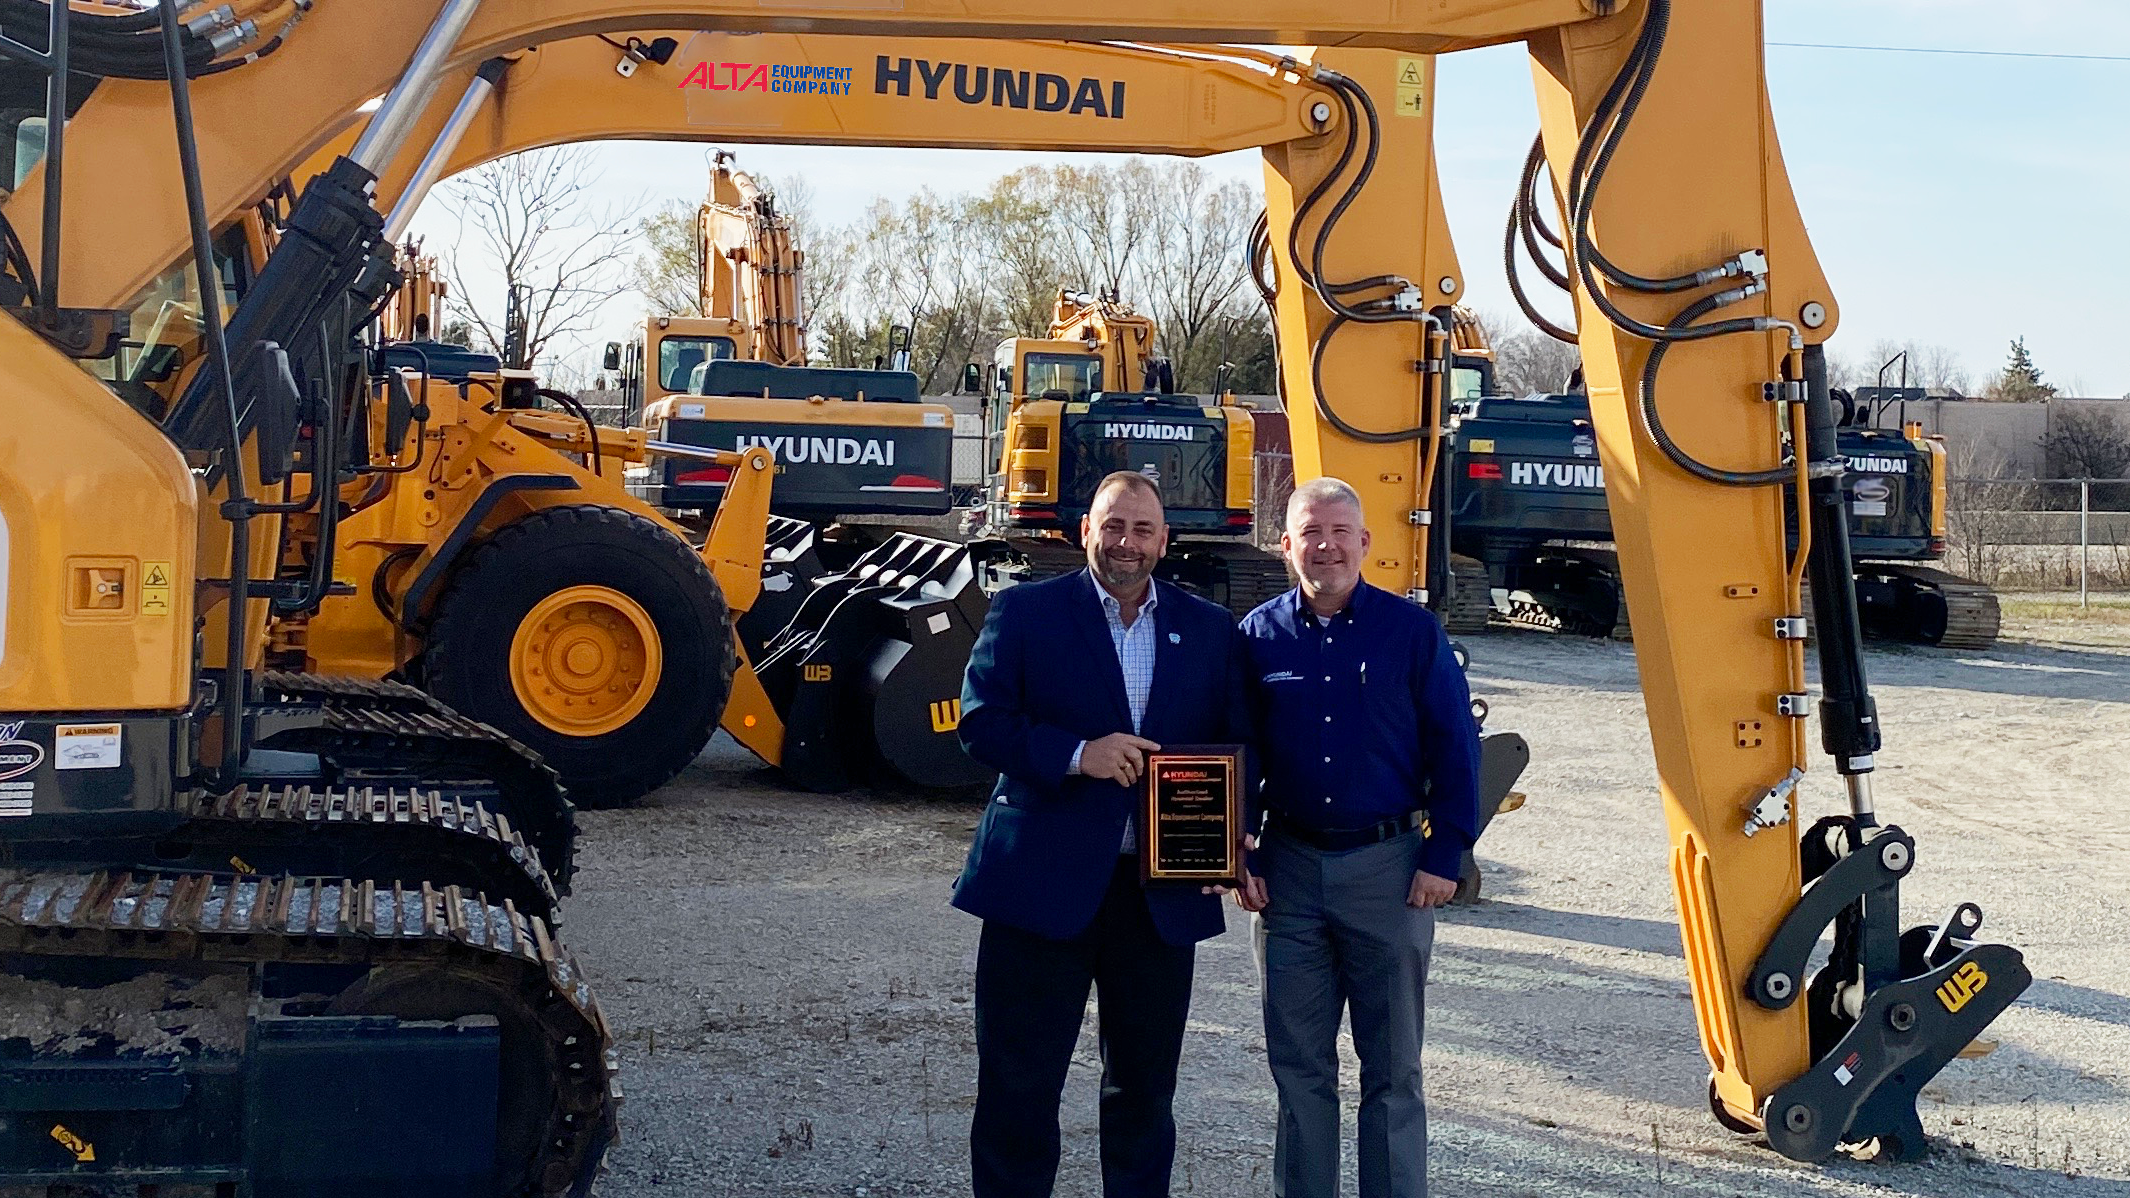 Hyundai Construction Equipment Adds Alta Equipment Company to Growing North American Distribution Network